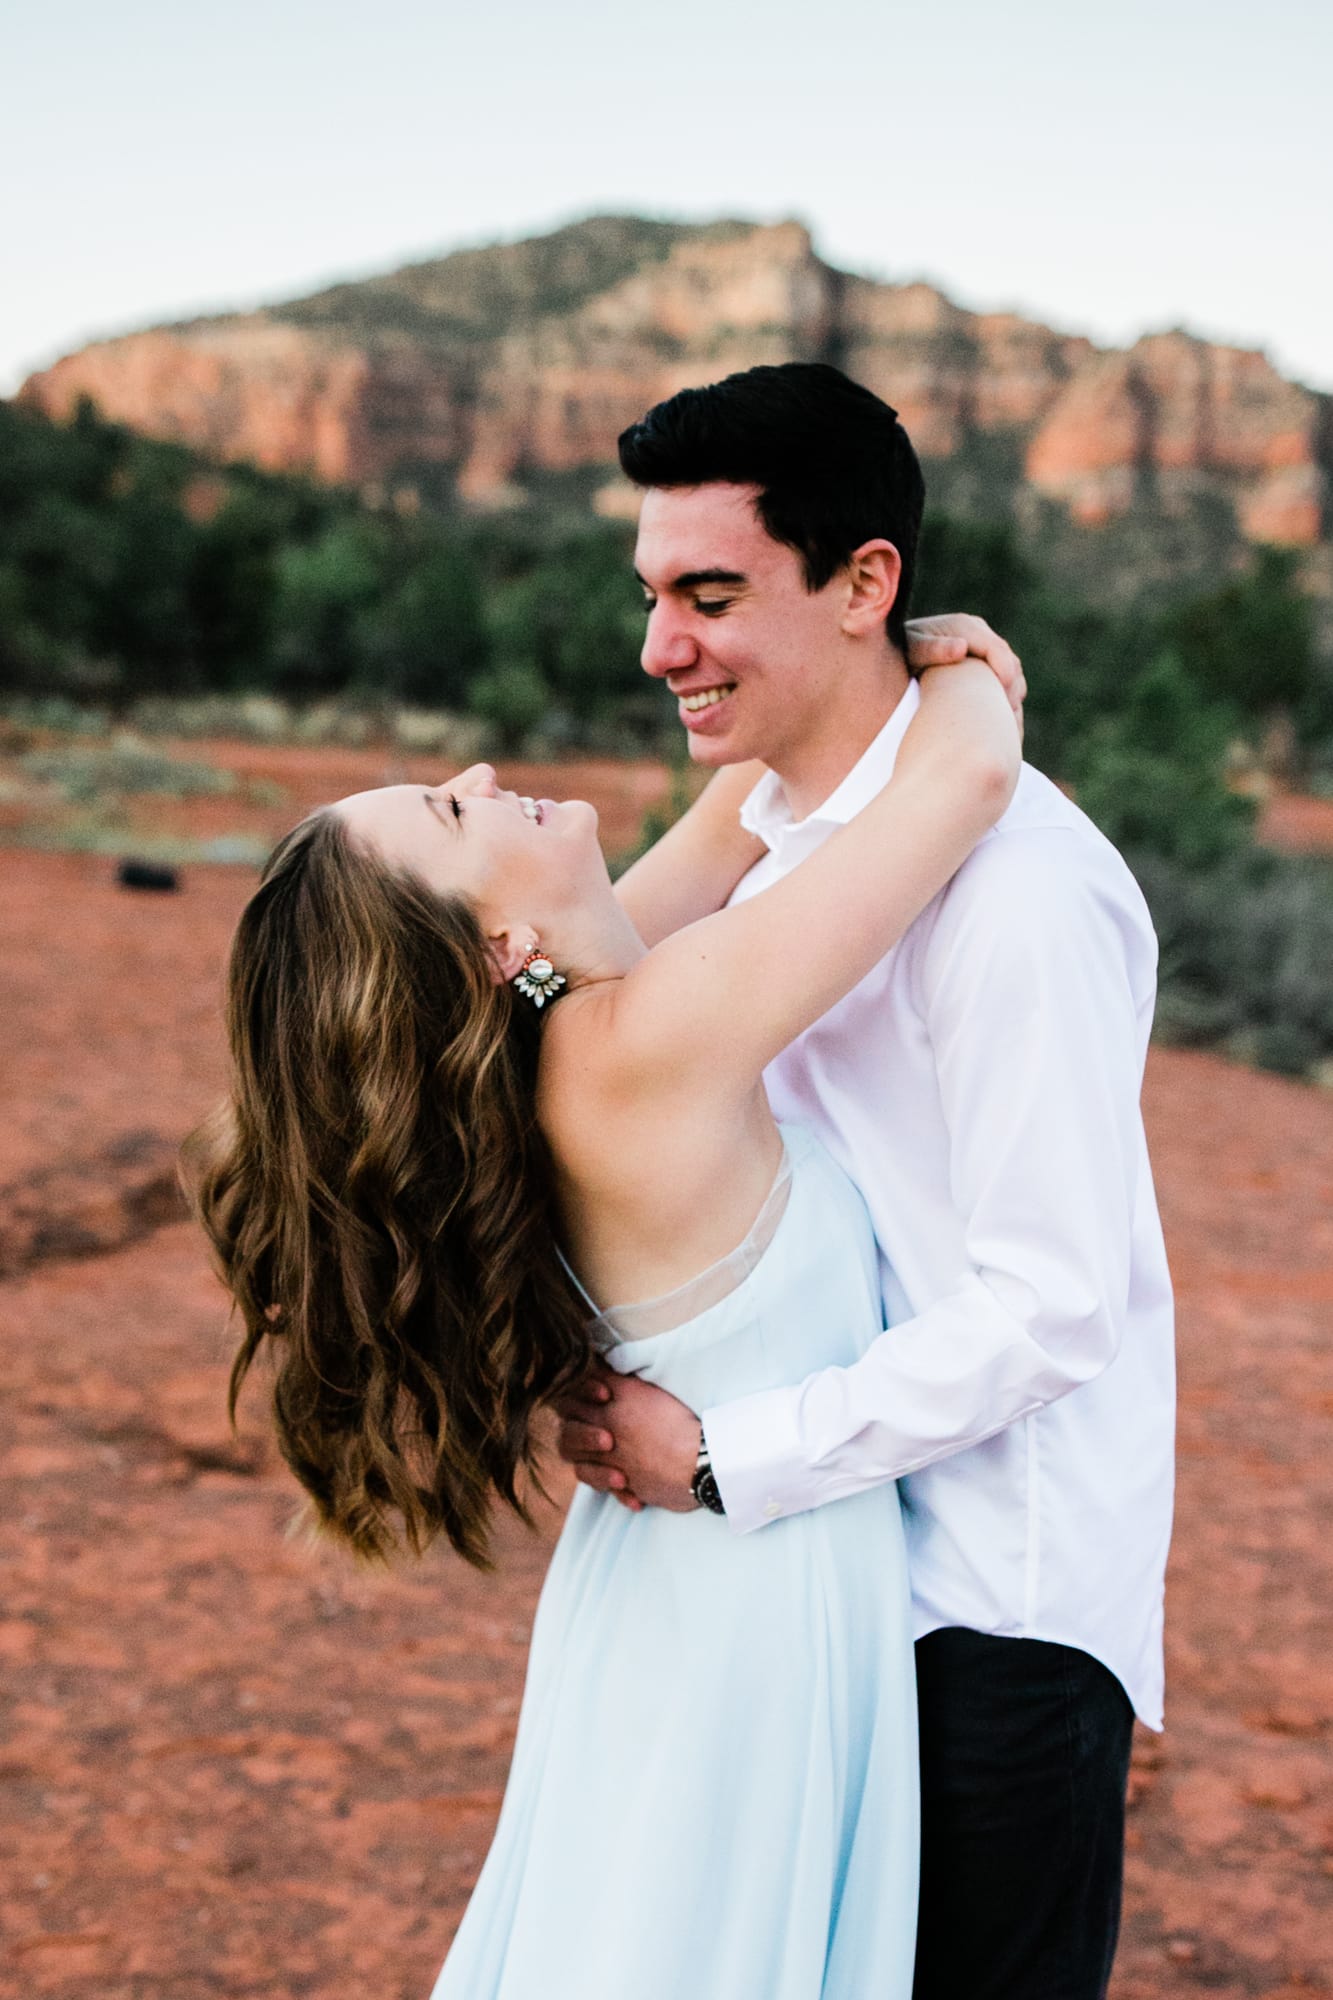 While hugging her groom, the bride throws her head back with joy during their Sedona Adventure Wedding.